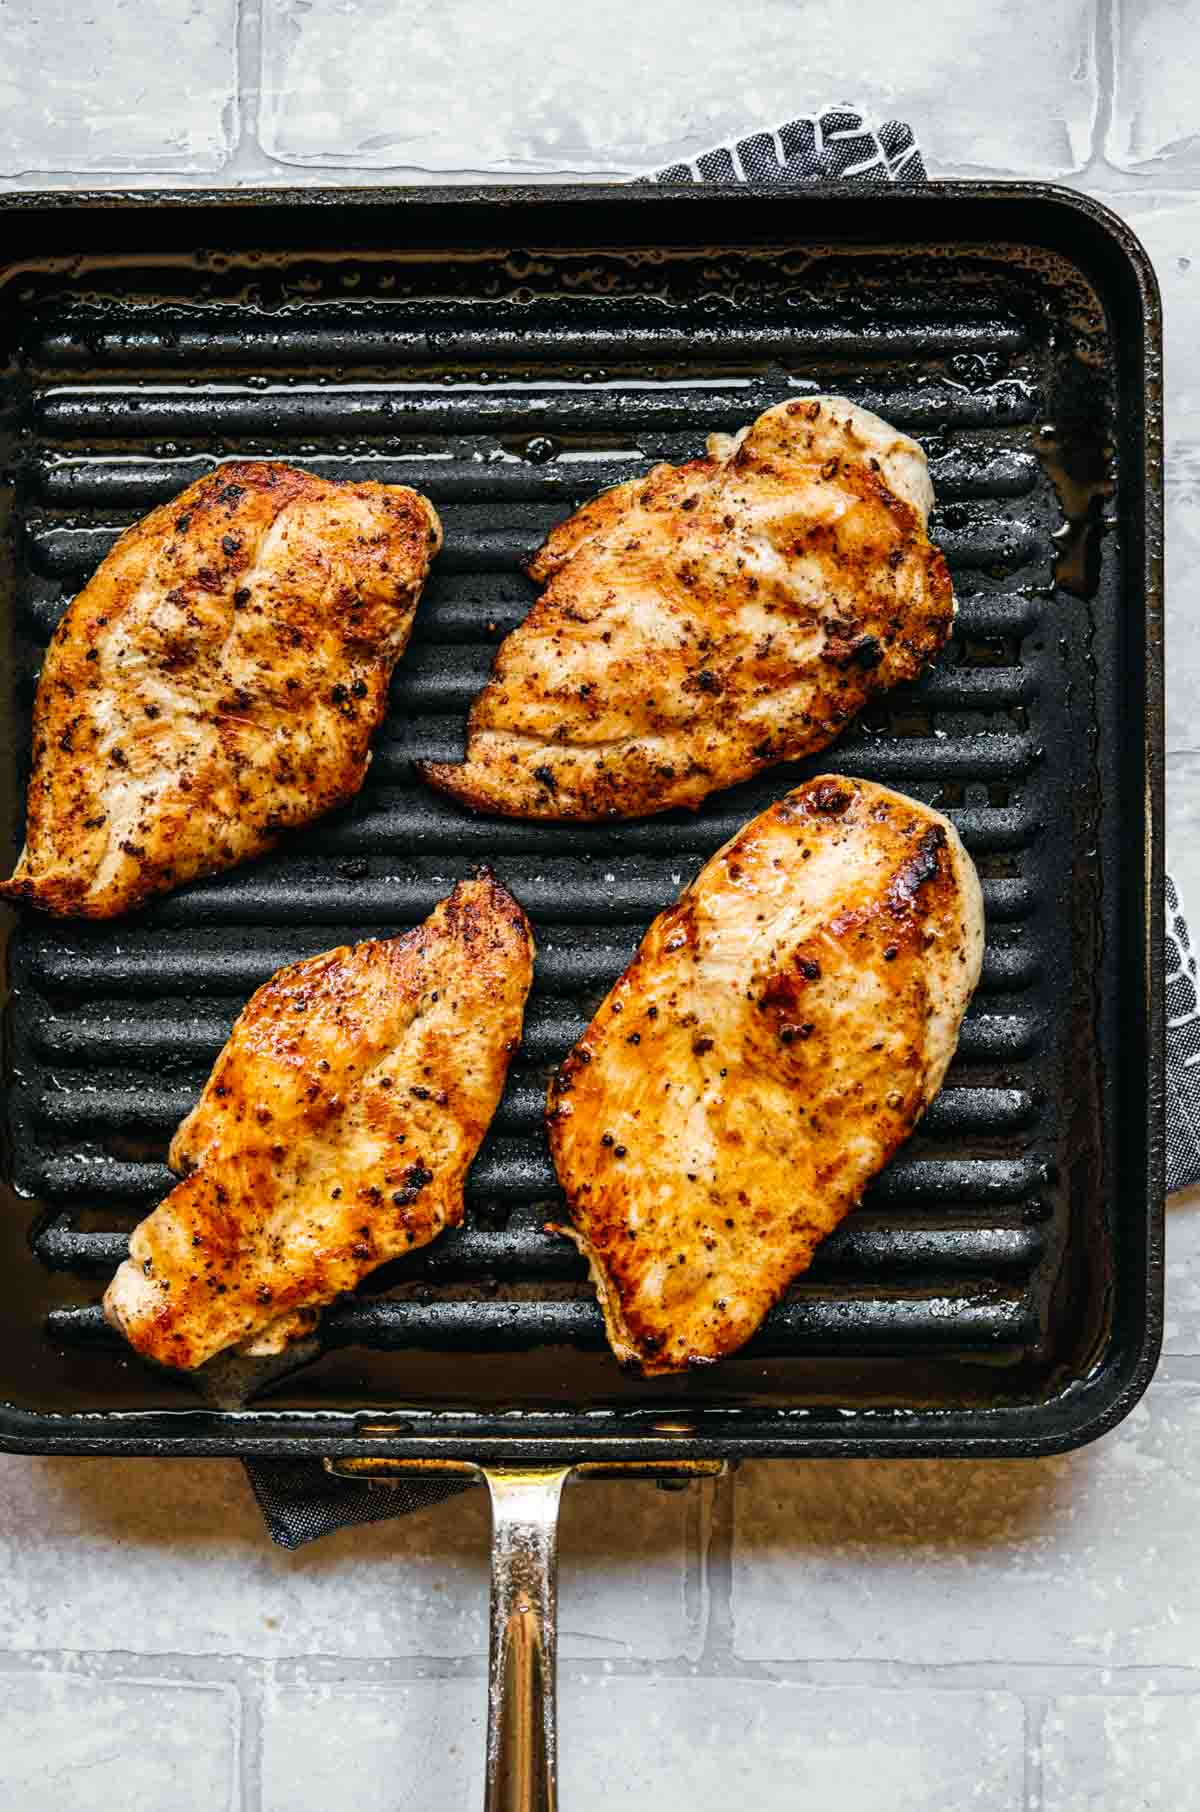 Grilled chicken breasts on pan for Grilled Chicken Sandwich